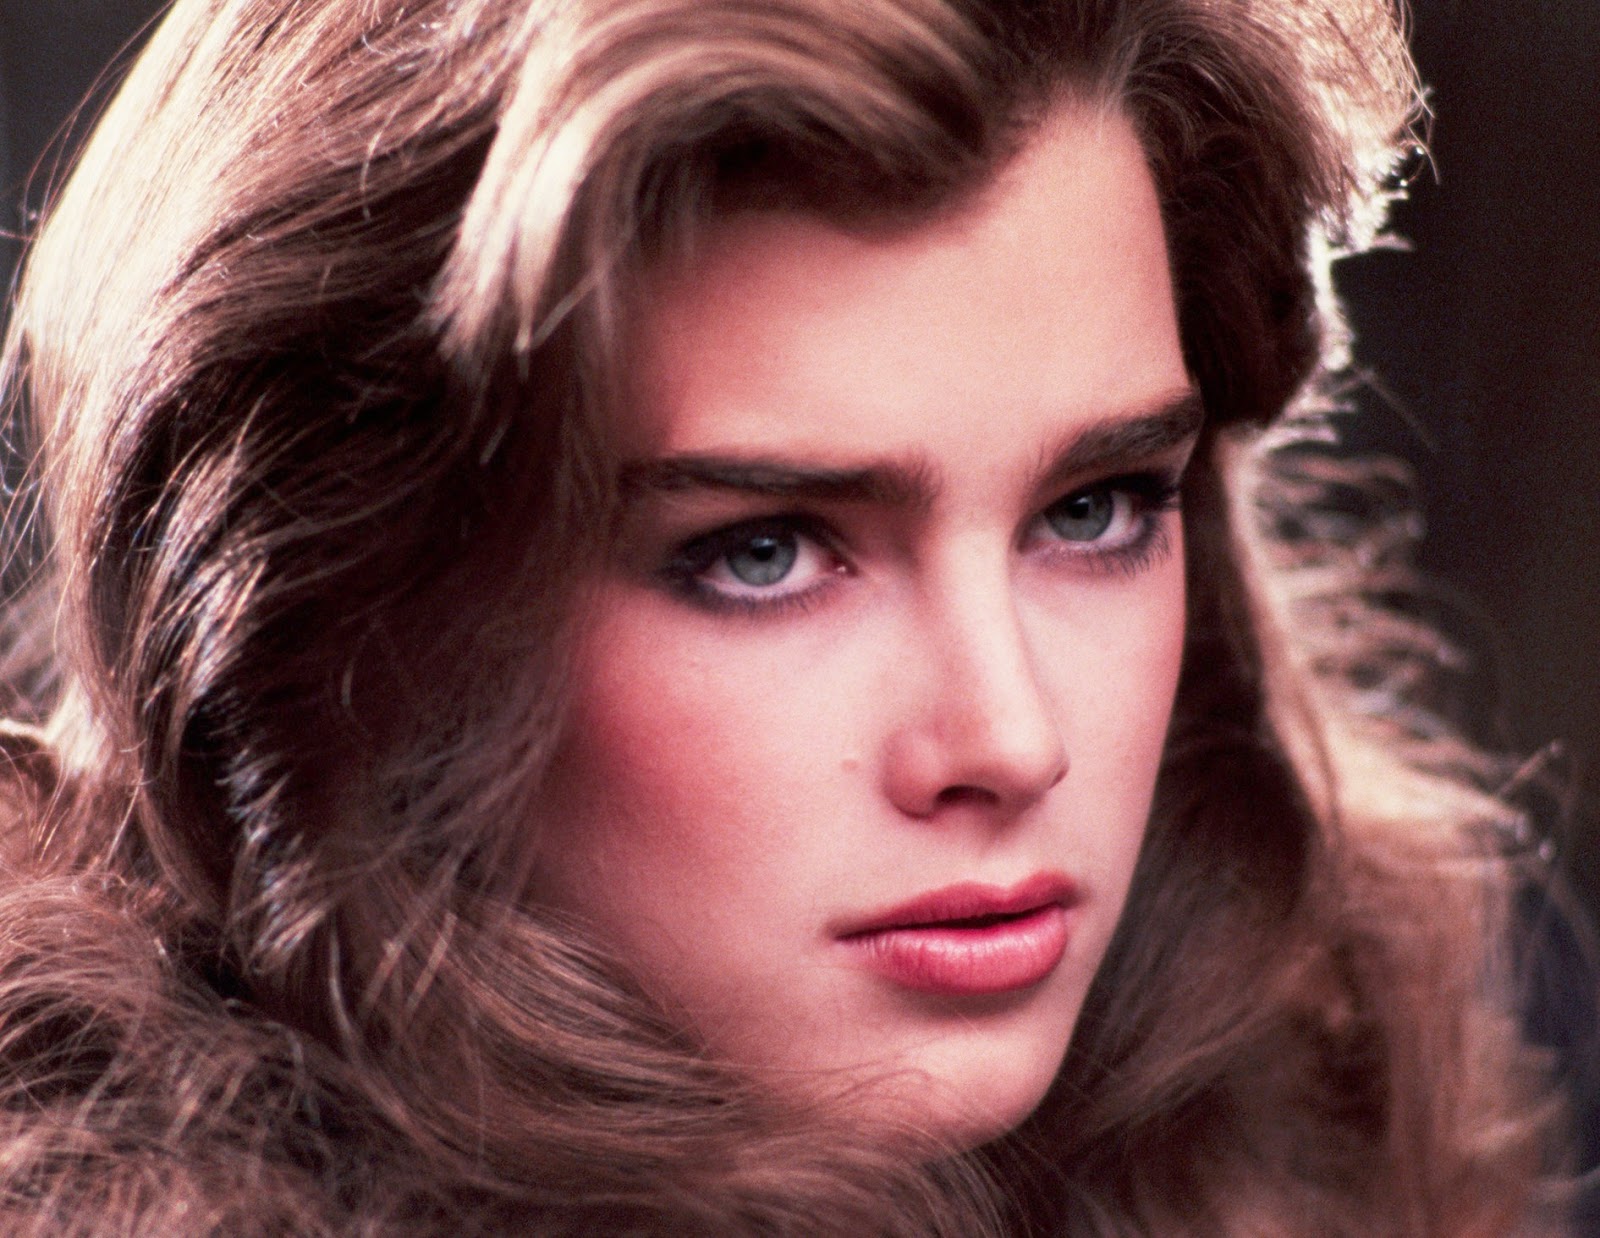 Slice of Cheesecake: Brooke Shields, pictorial